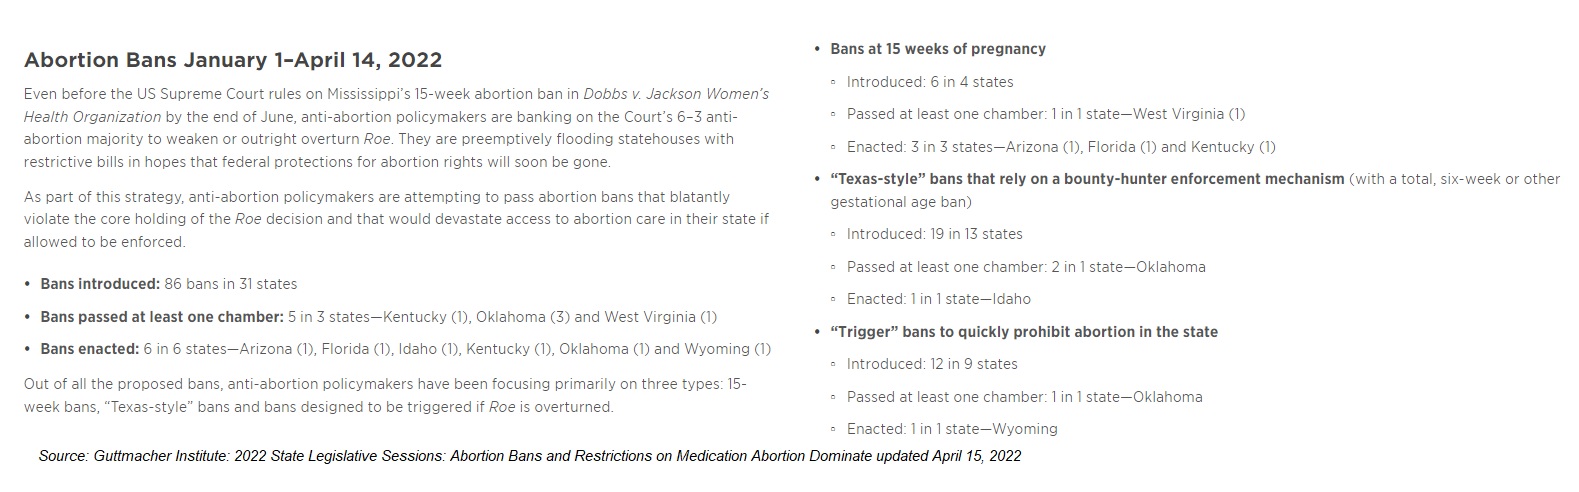 Guttmacher abortion laws abortion bans as of April 14 2022